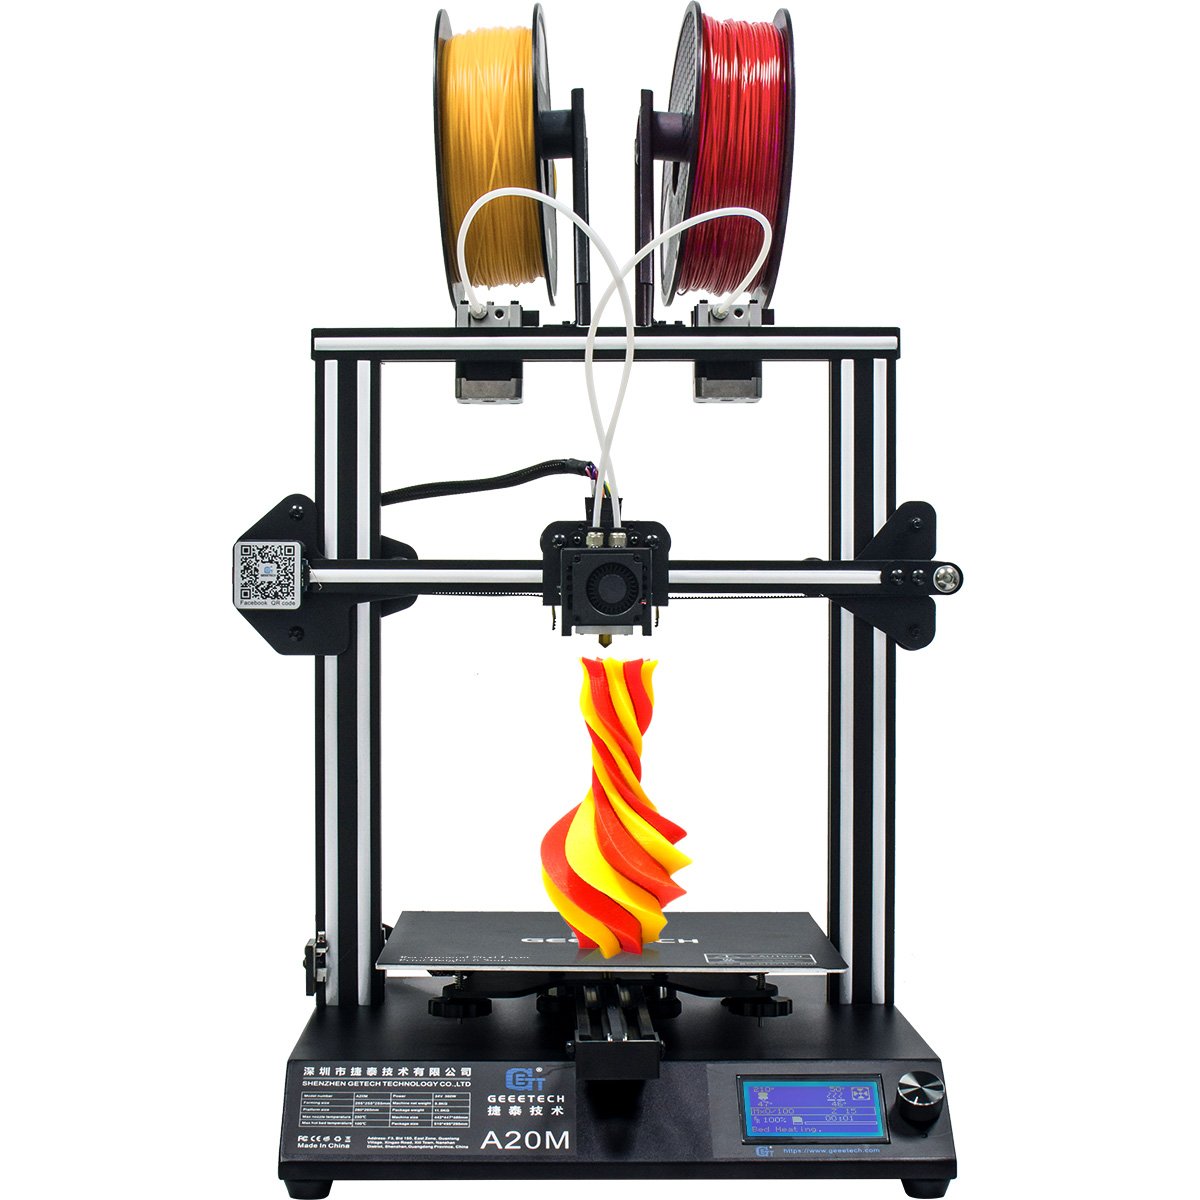 GeeetechÂ® A20M Mix-color 3D Printer 255x255x255mm Printing Size With Filament Detector/Power Resume/Superplate Hotbed/Modular Design/360Â° Ventilation/